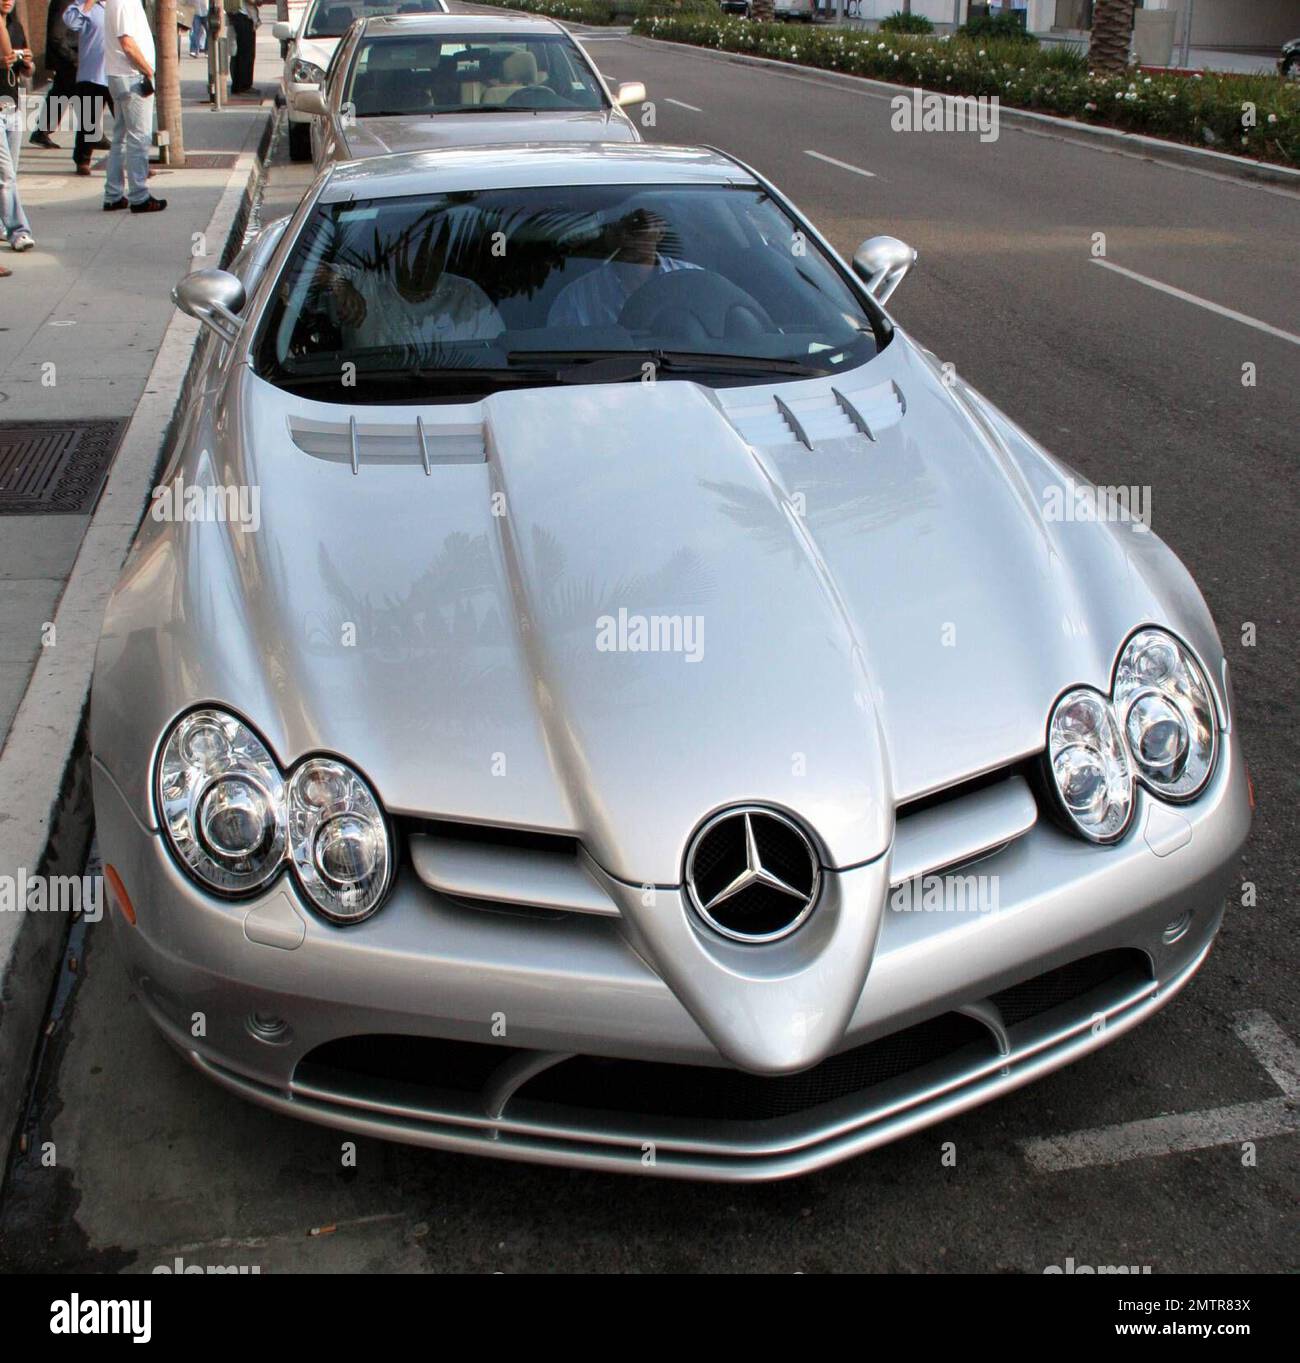 Exclusive!! Scott Storch gives directions on how to load his $450,000 Mercedes  Benz with bags full of designer Louis Vuitton clothes. 9/18/05 Stock Photo  - Alamy